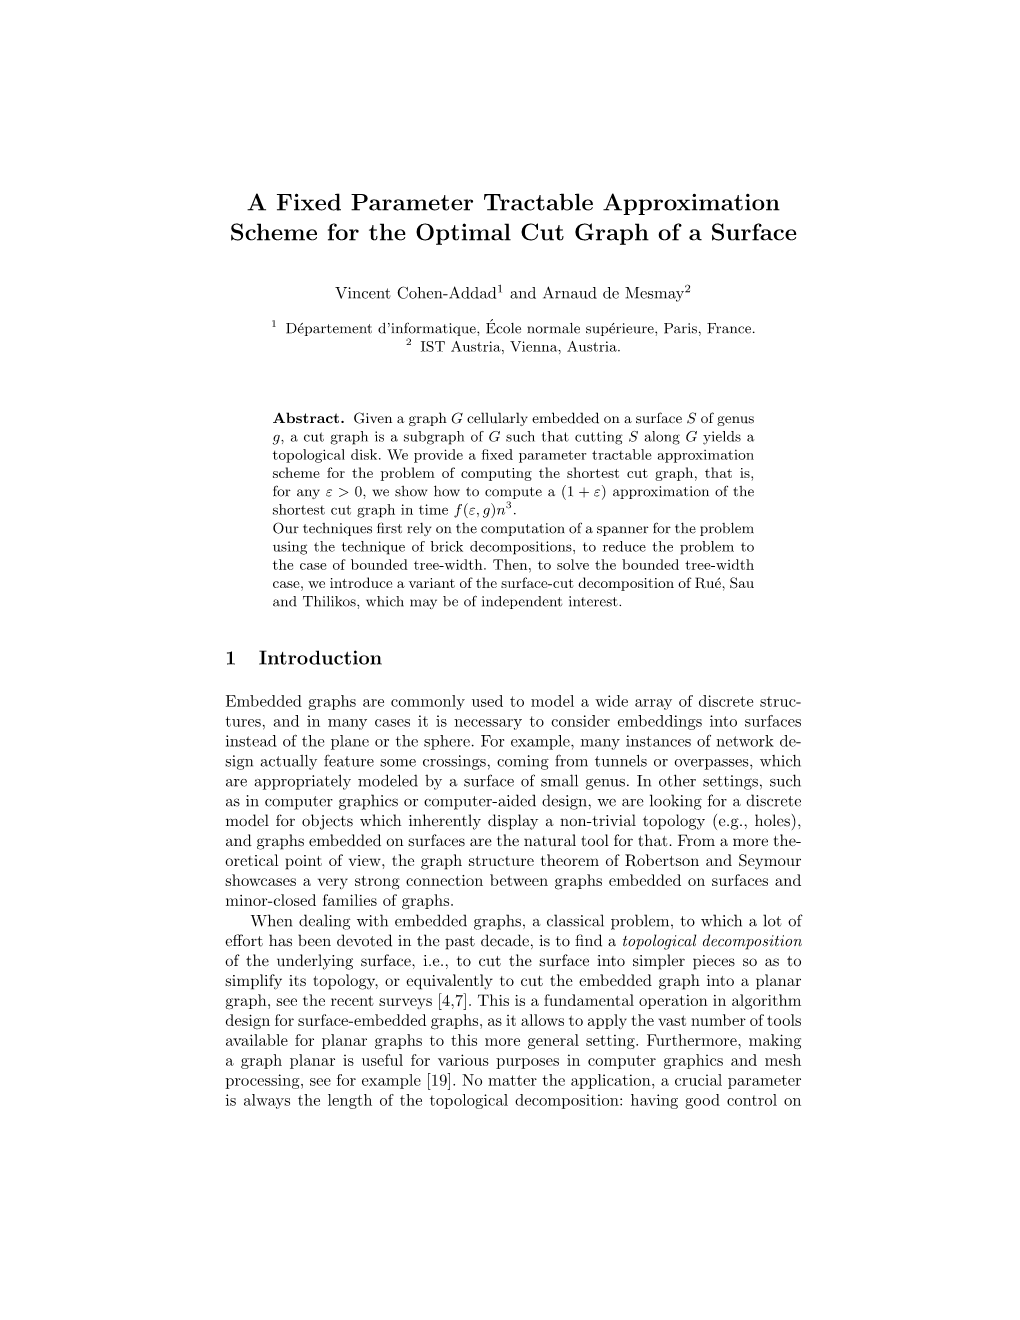 A Fixed Parameter Tractable Approximation Scheme for the Optimal Cut Graph of a Surface